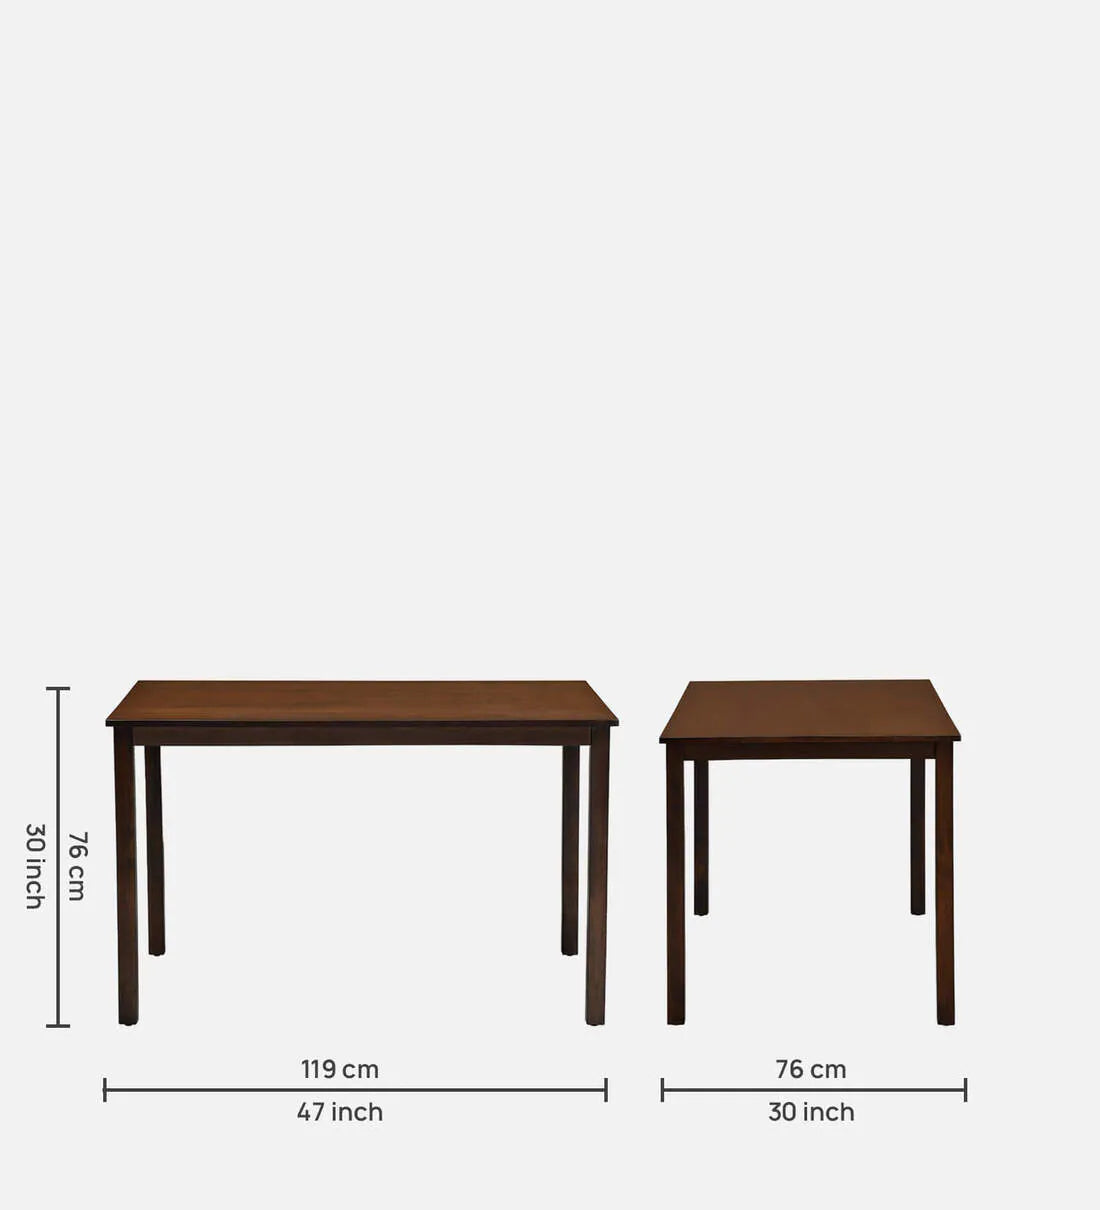 Carven Foaldable 4 Seater Dining Set In Walnut Finish